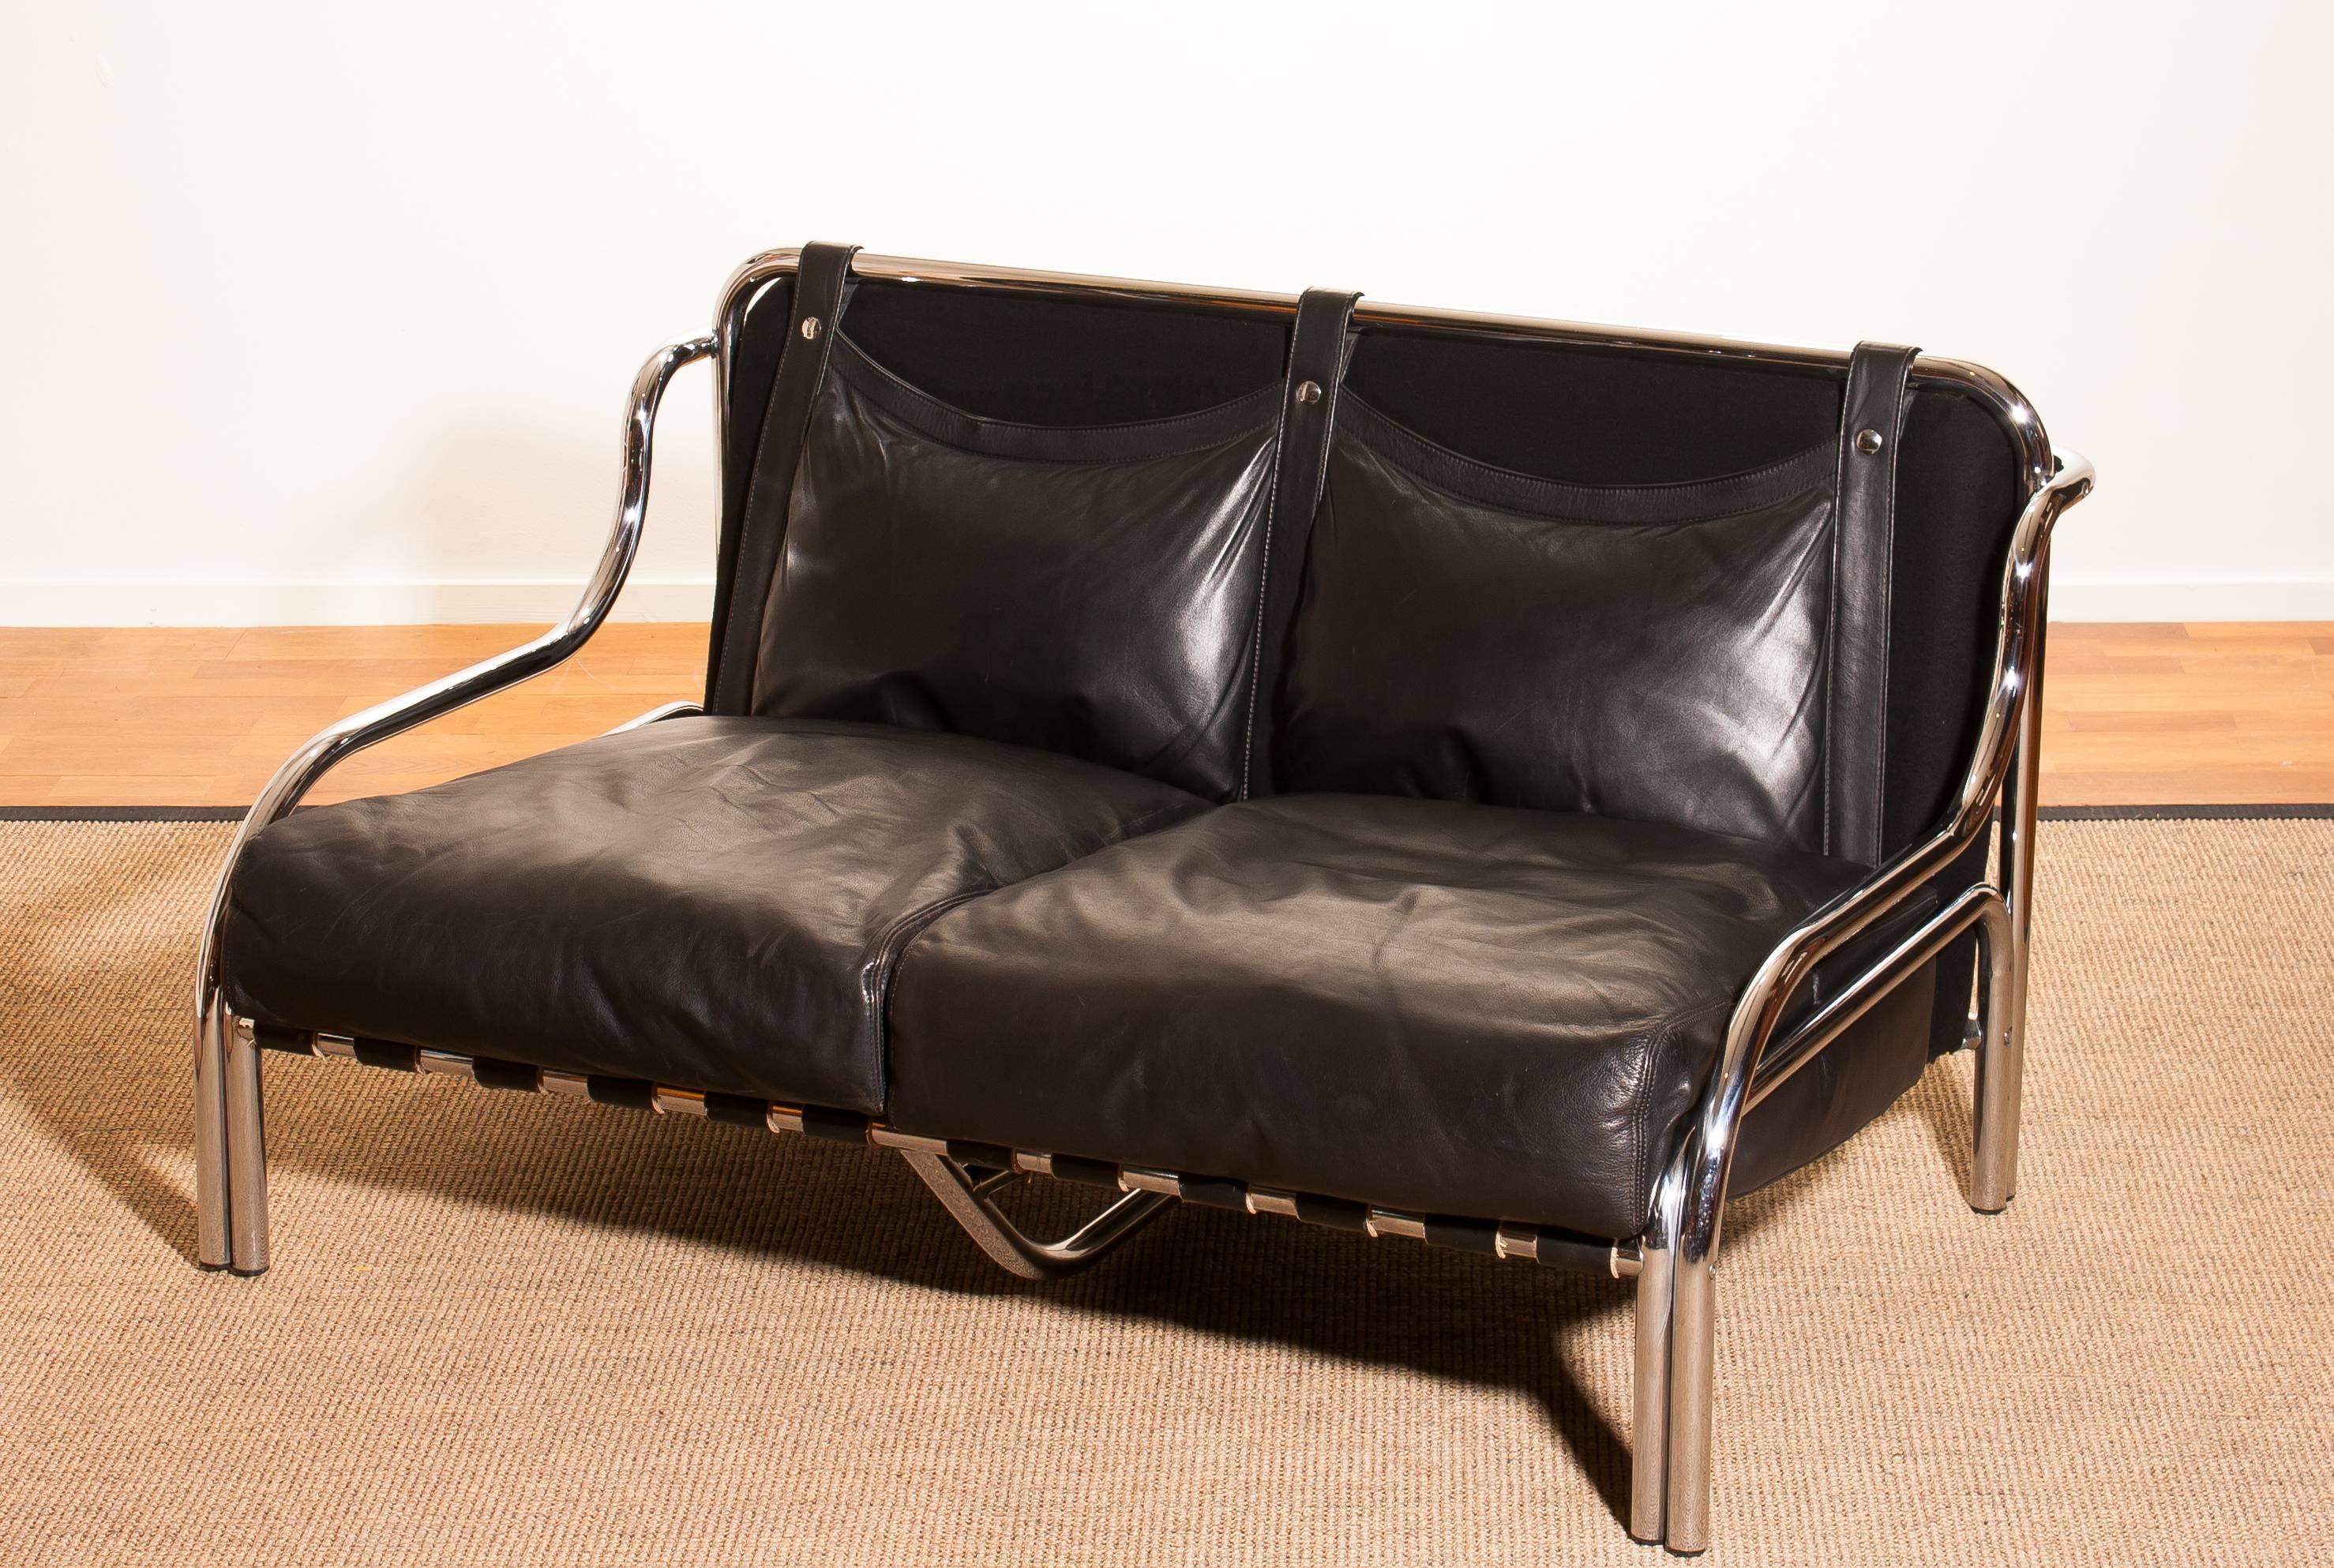 Wonderful lounge sofa designed by Gae Aulenti for Poltronova Italy.
This beautiful sofa is made of a black leather seating on a chromed frame.
It is in an excellent condition.
Period 1960s.
Dimensions: H 73 cm, W 130 cm, D 80 cm, SH 30 cm.
 